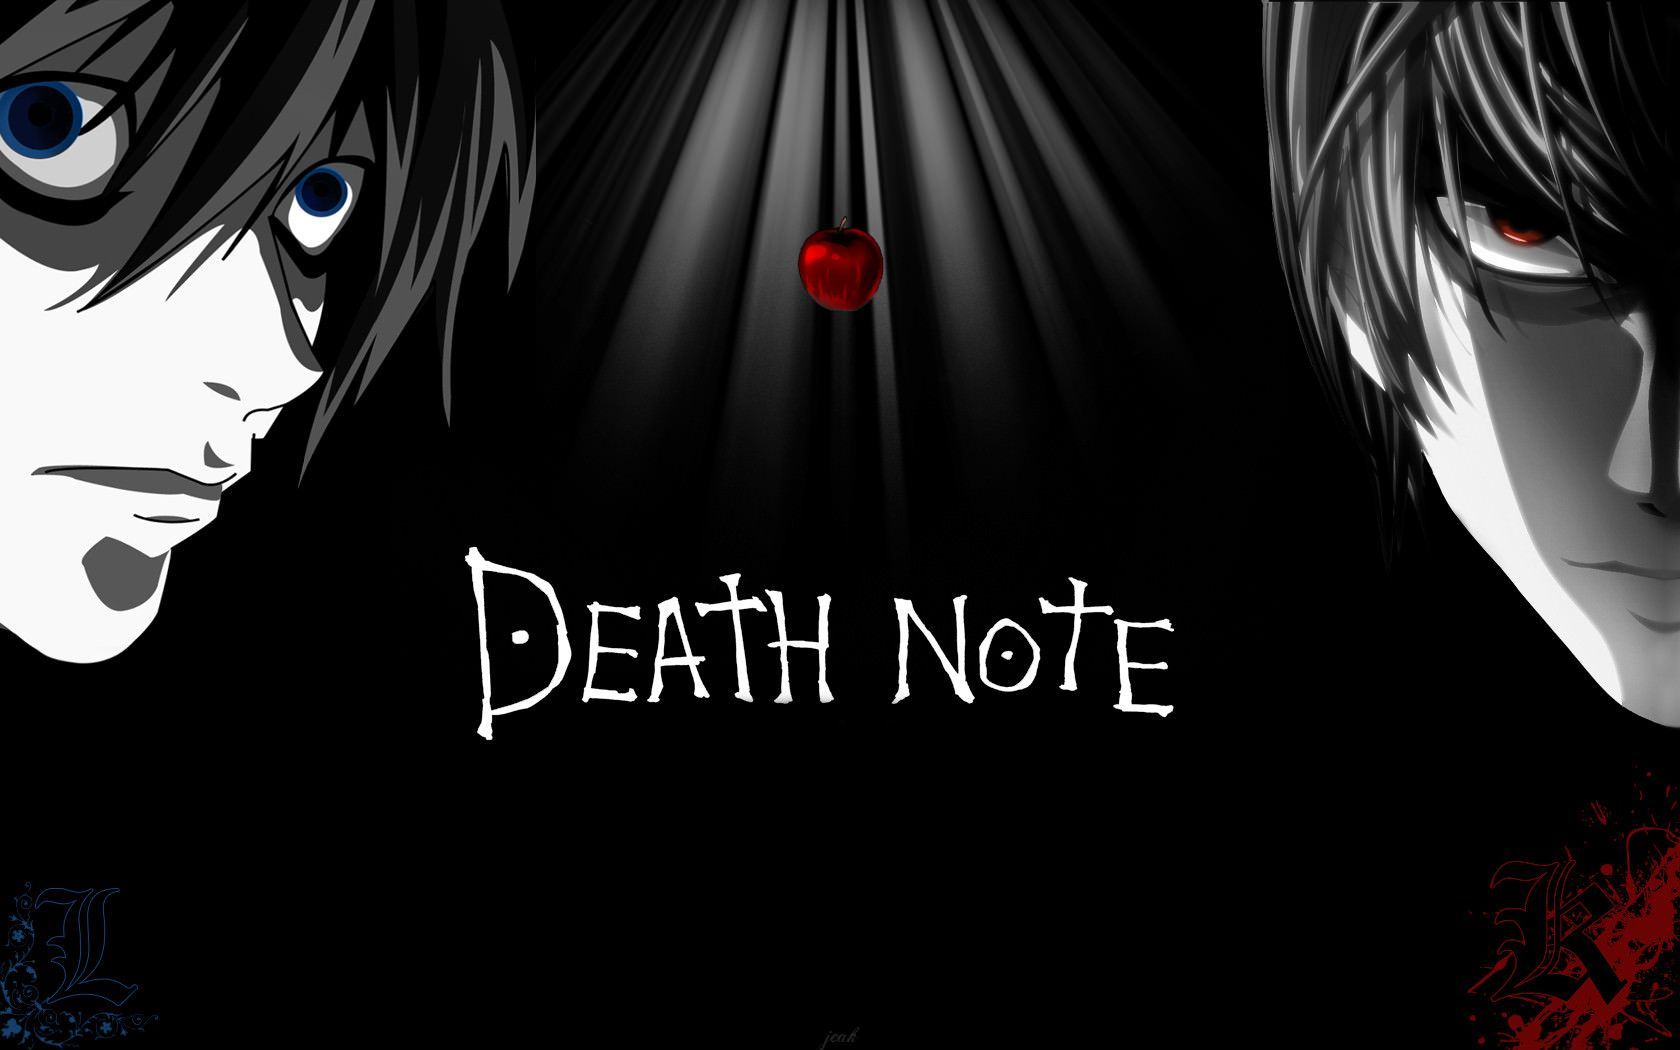 animation wallpaper for mobile phone and desktop PC. Death